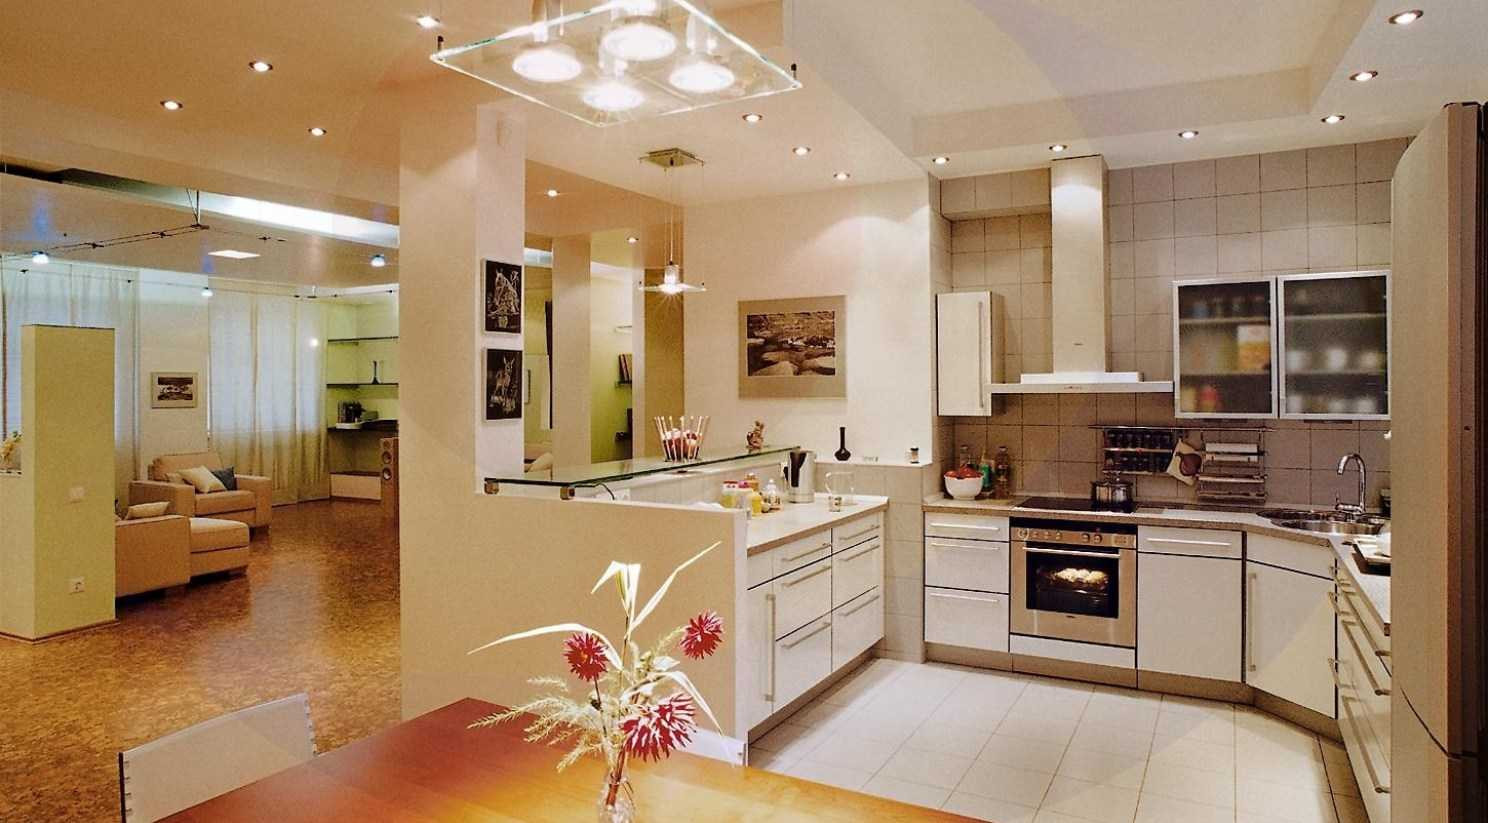 Bright Kitchen Ceiling Lights
 Ceiling And Lighting Ideas Kitchen Low Track For Ceilings